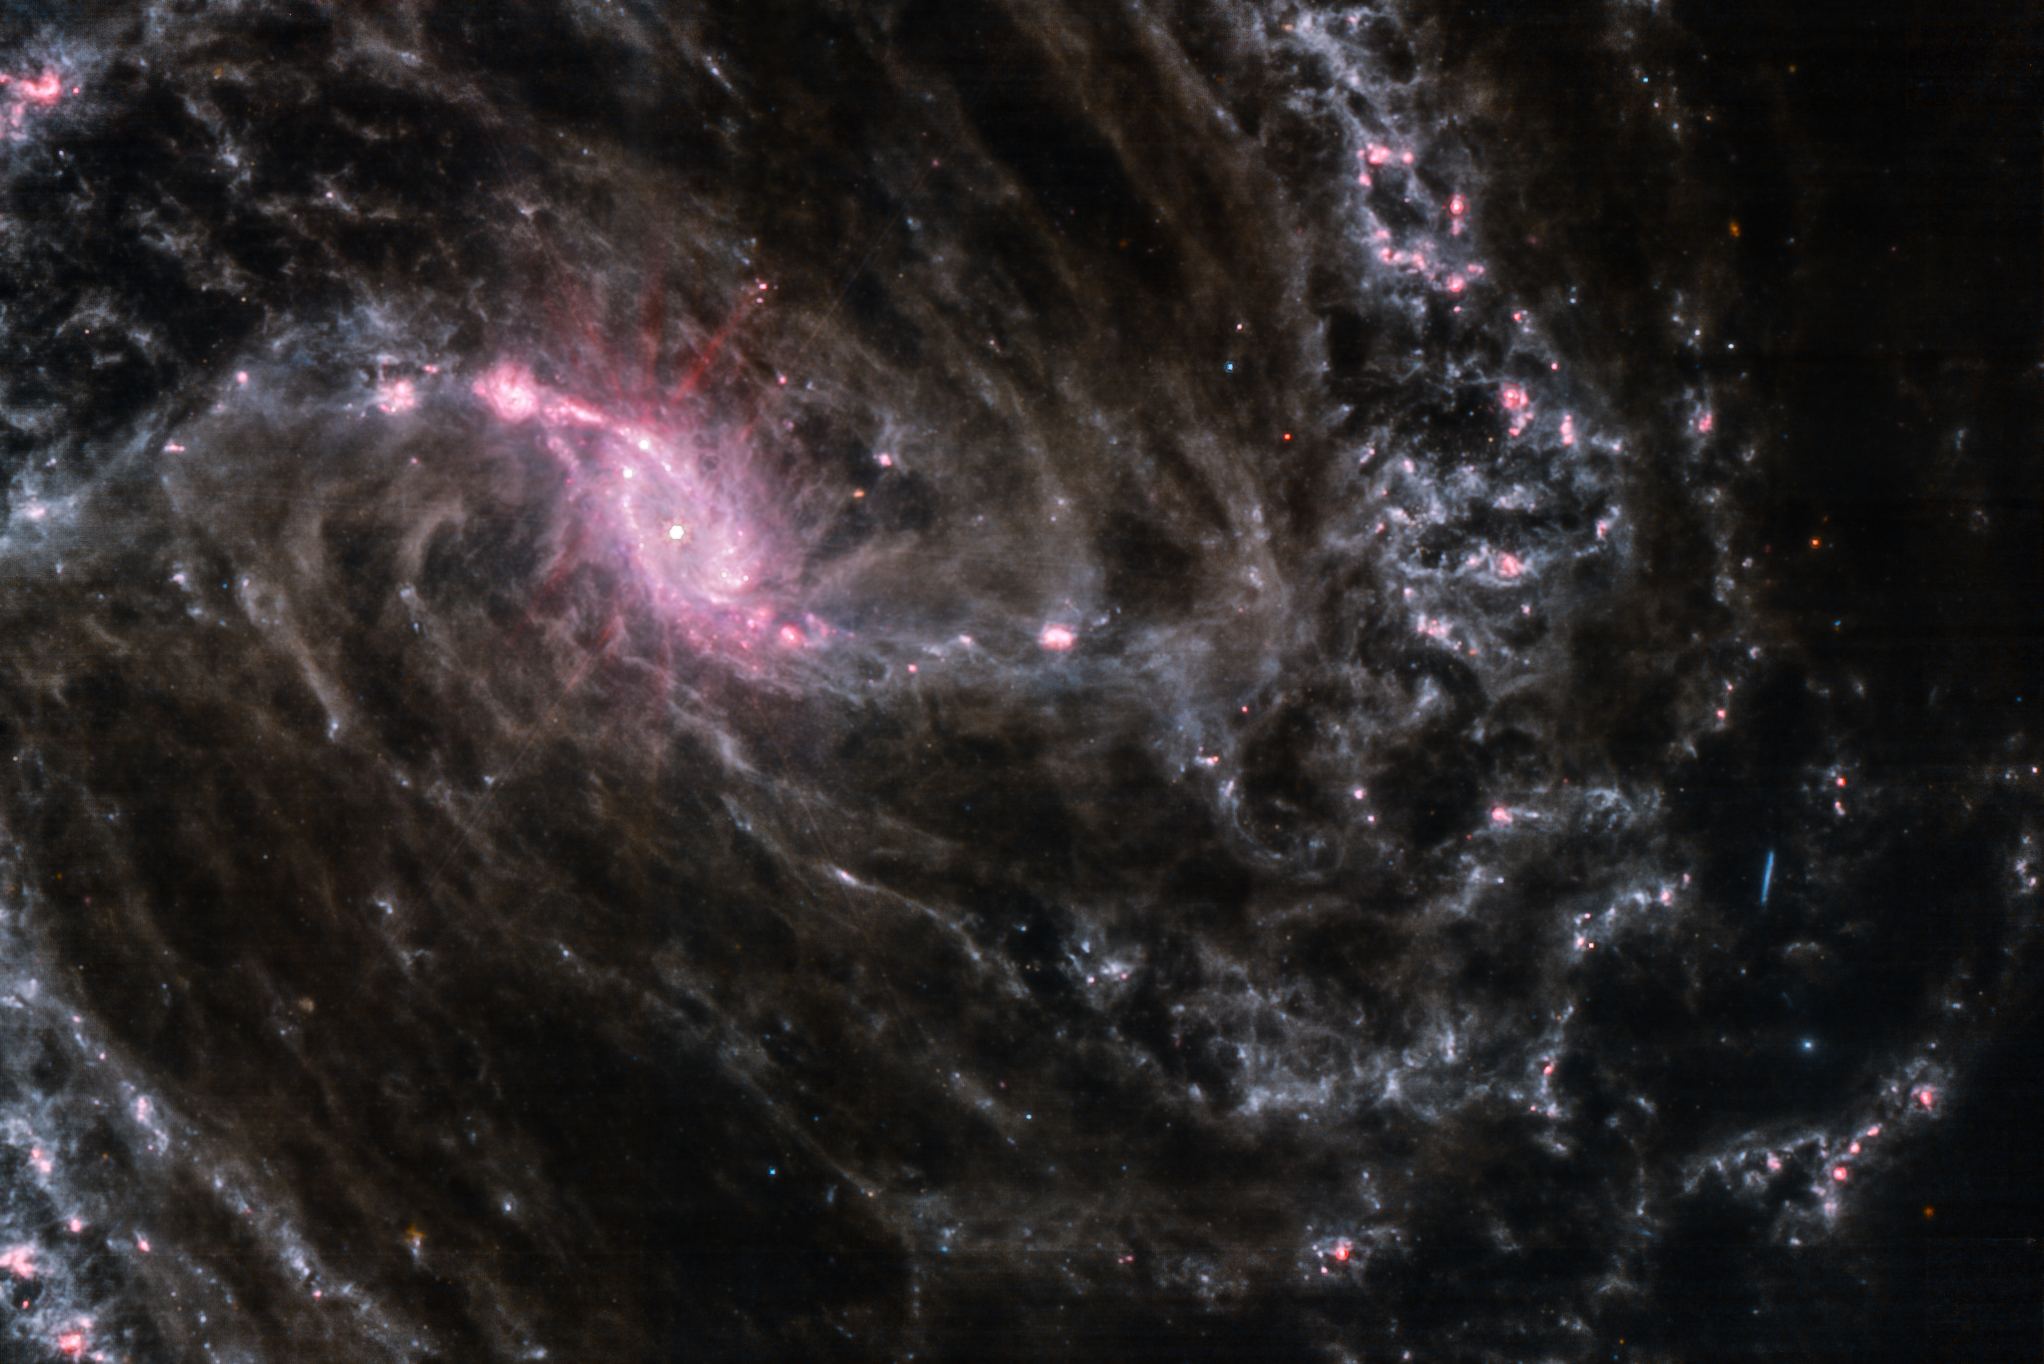 A New Image From Webb Shows Galaxy NGC 1365, Known to Have an Actively Feeding S..